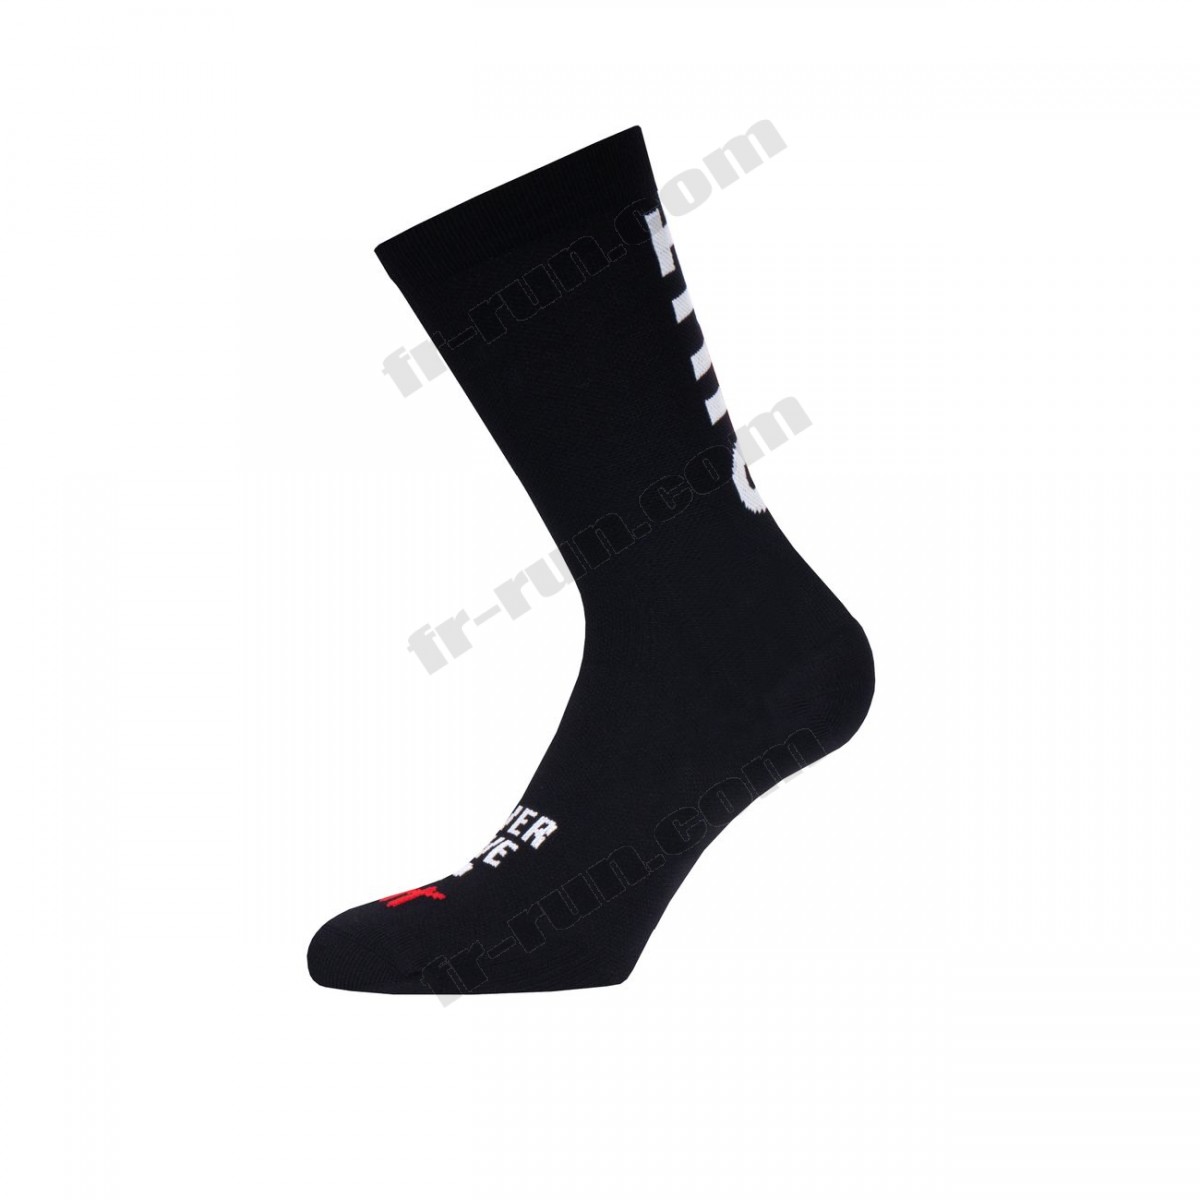 Pacific And Co/running adulte PACIFIC and CO DON'T QUIT Unisex Performance Socks ◇◇◇ Pas Cher Du Tout - -1